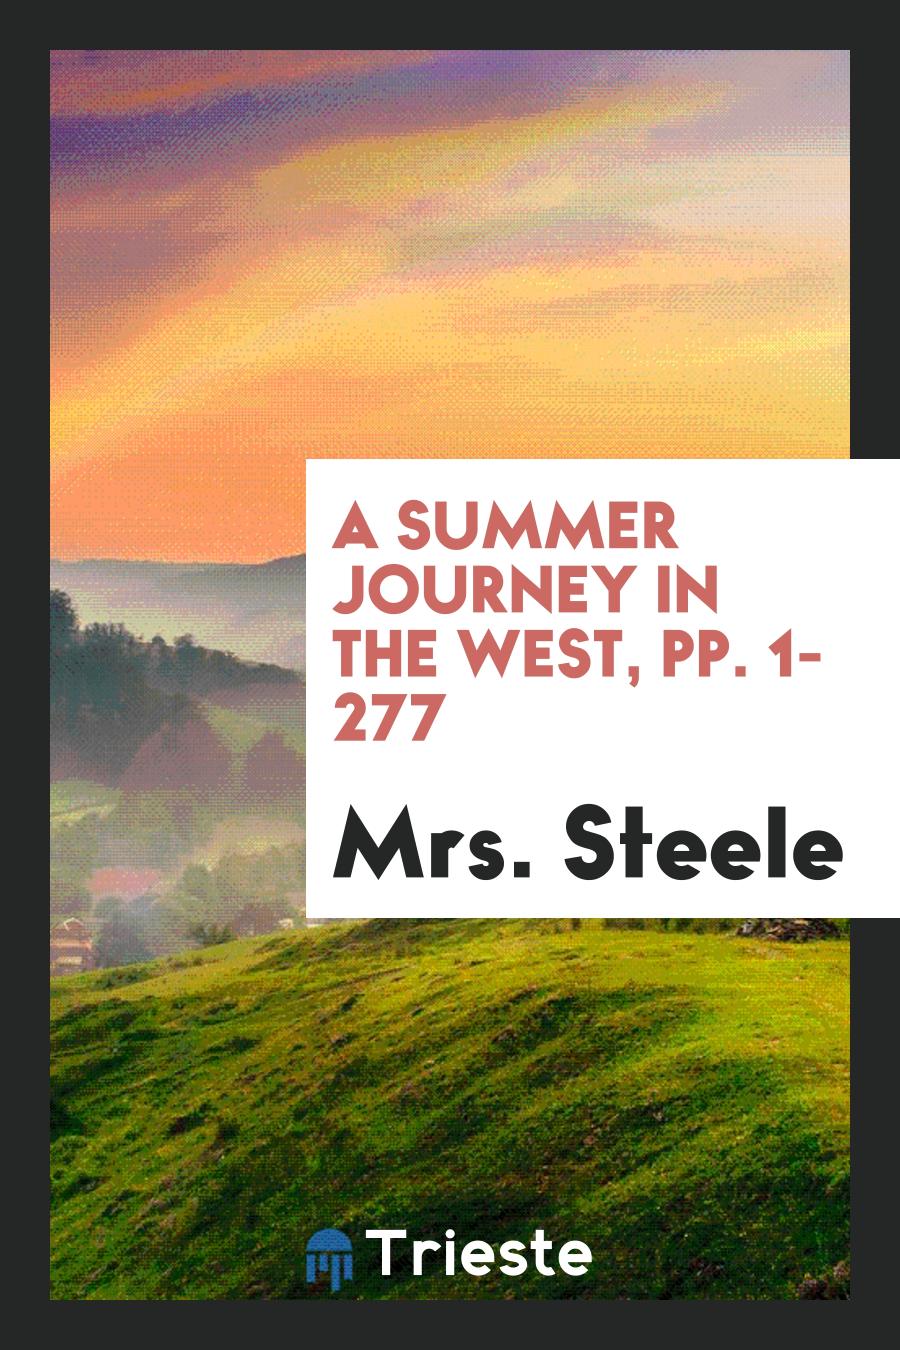 A Summer Journey in the West, pp. 1-277